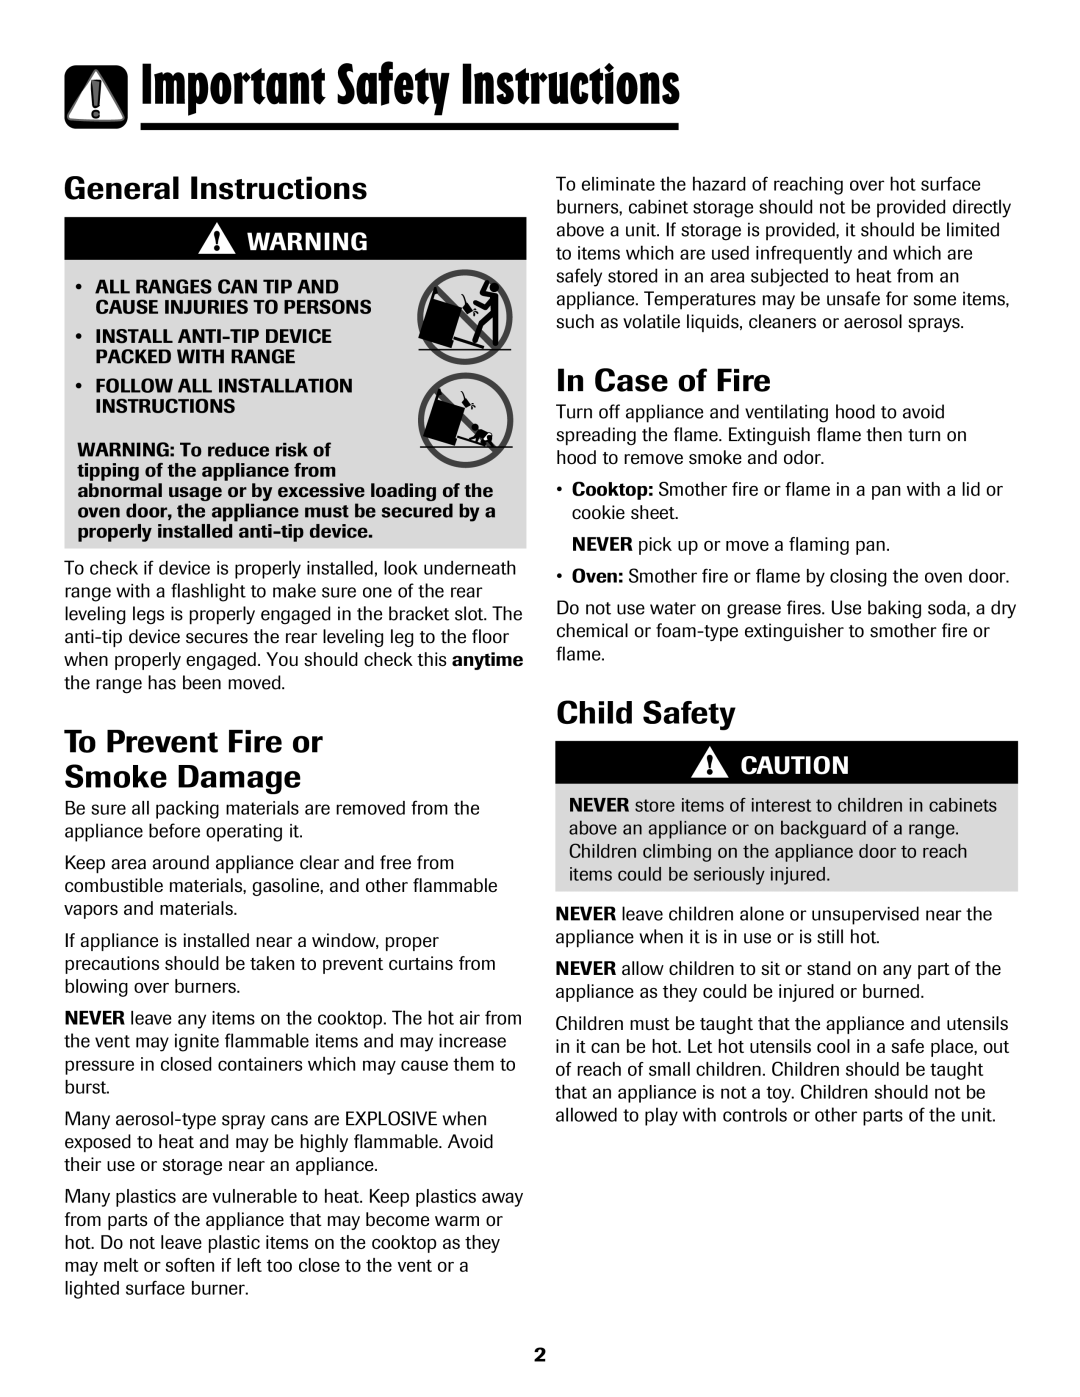 Amana 500 manual Important Safety Instructions, General Instructions, In Case of Fire, To Prevent Fire or Smoke Damage 